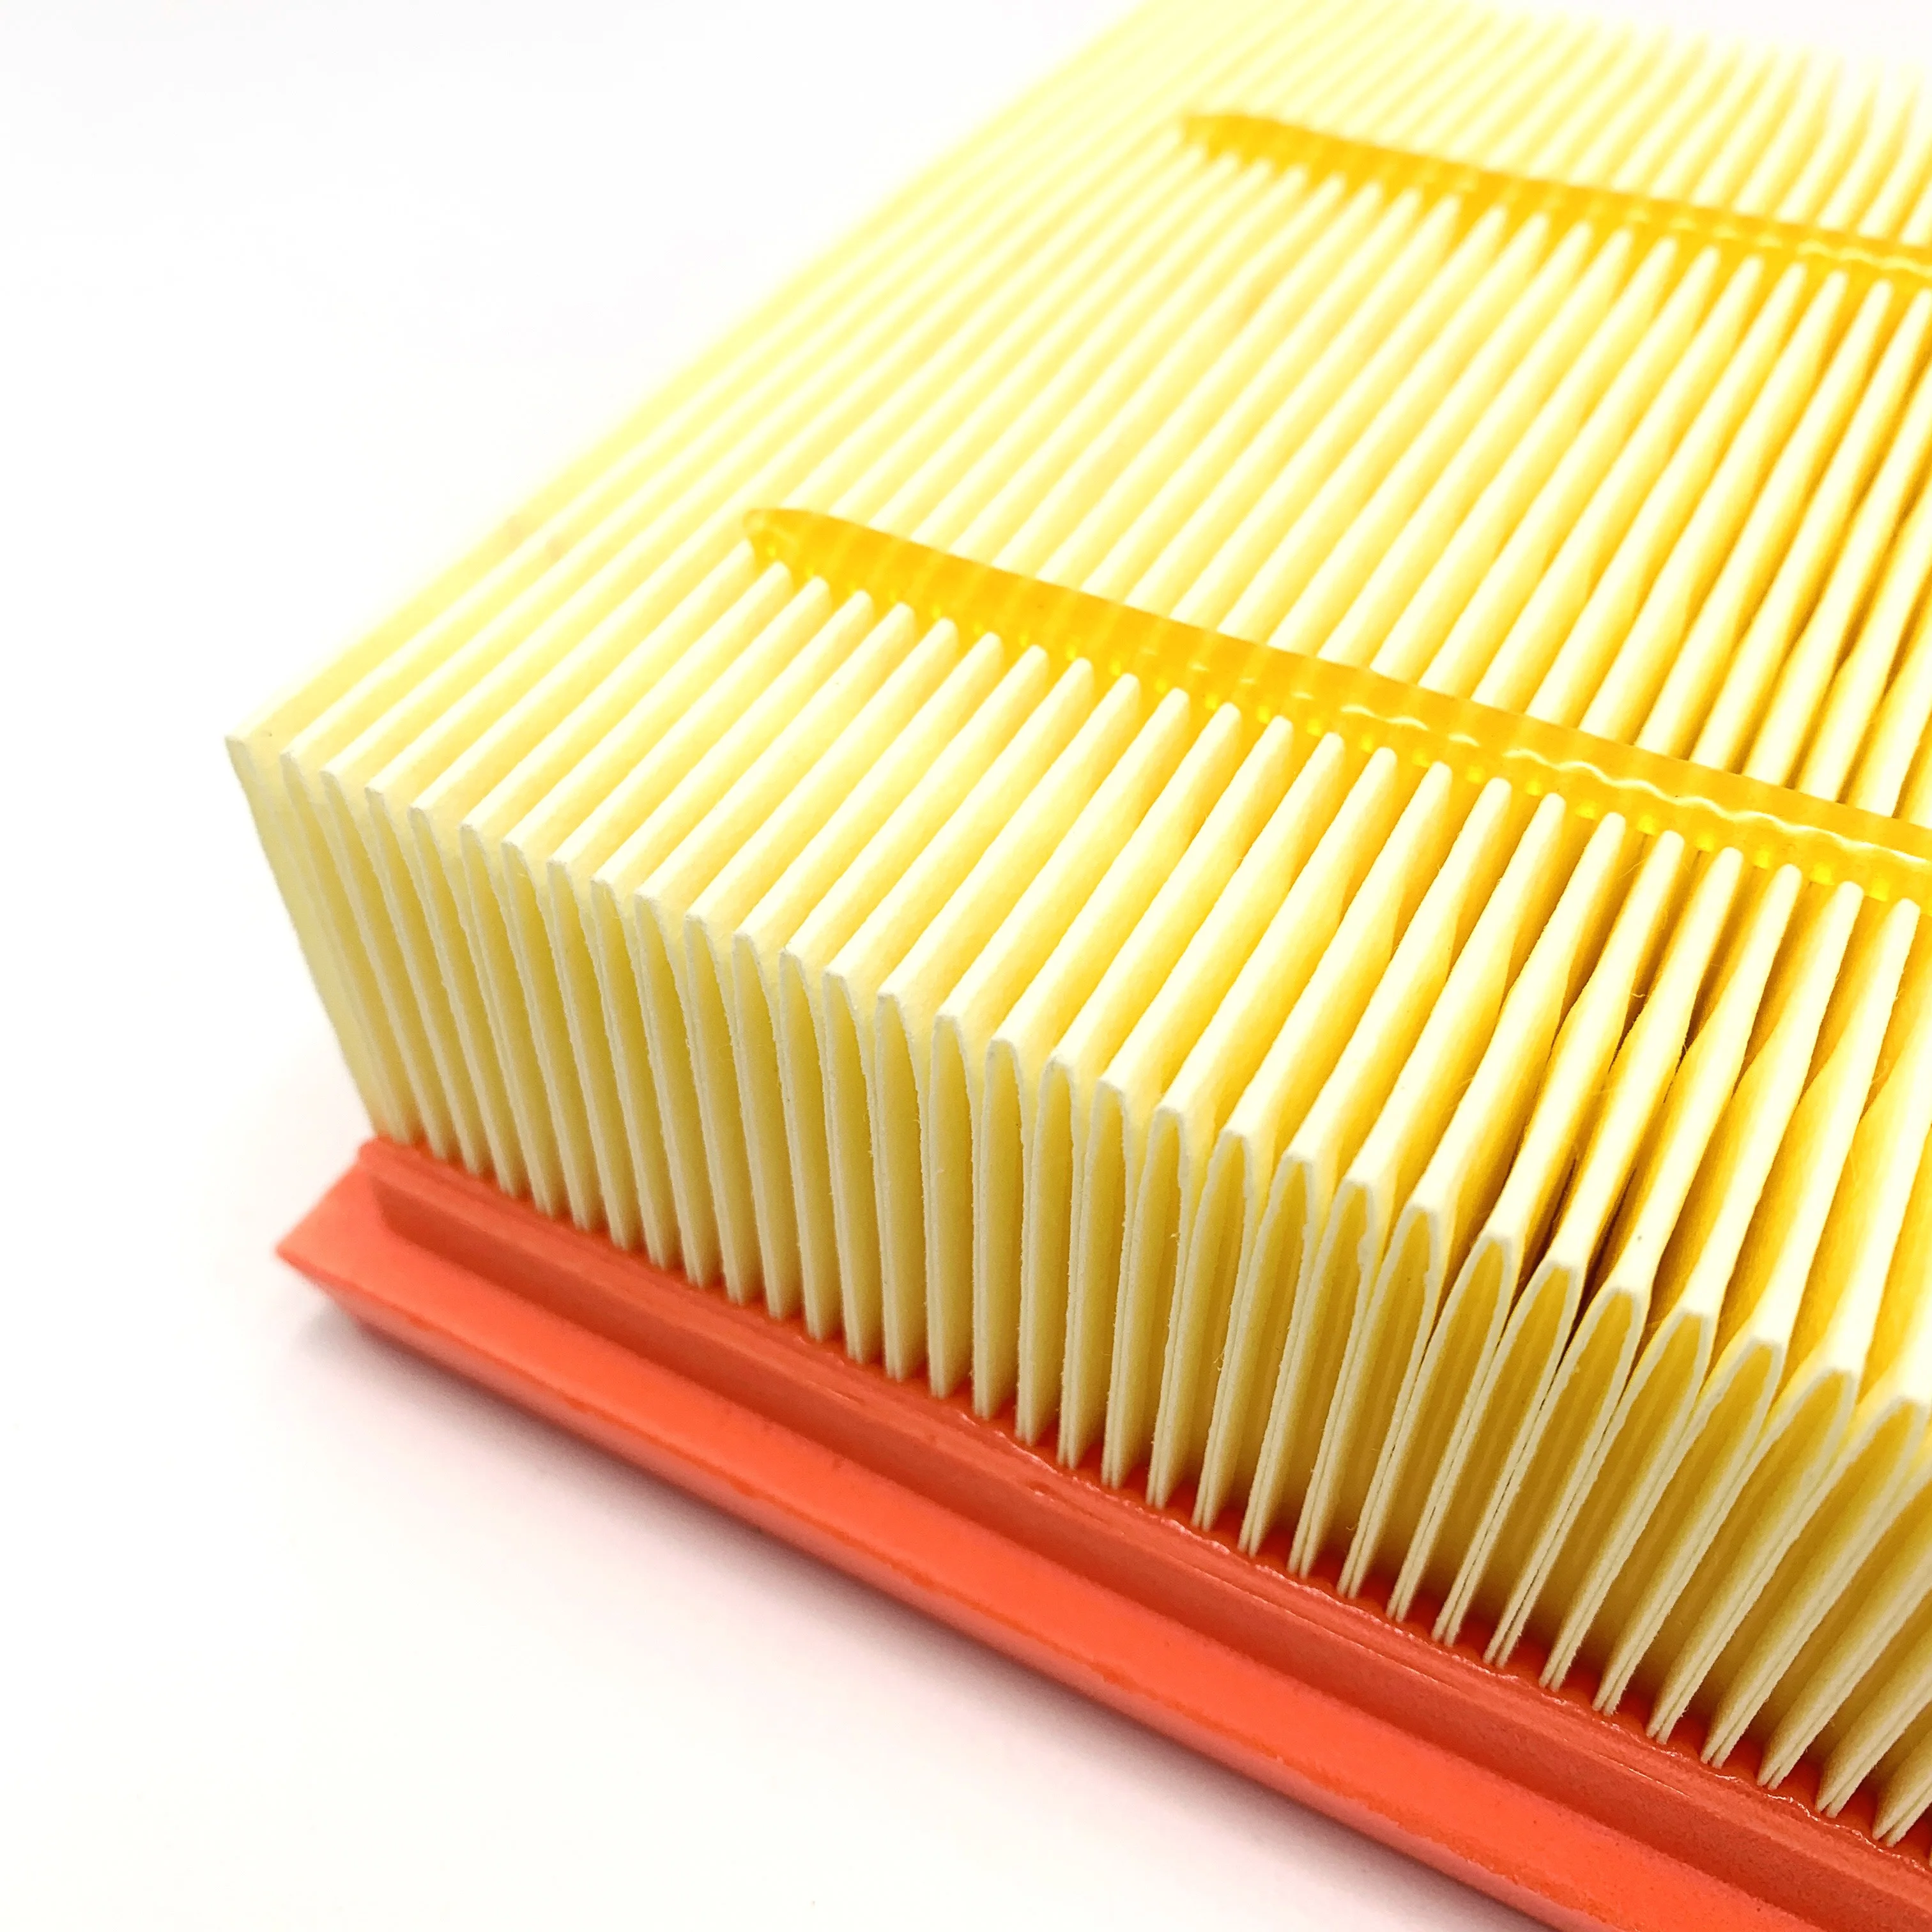 Support customized car air filter, high-end engine air filter, dust-proof and particle-proof  1770940004